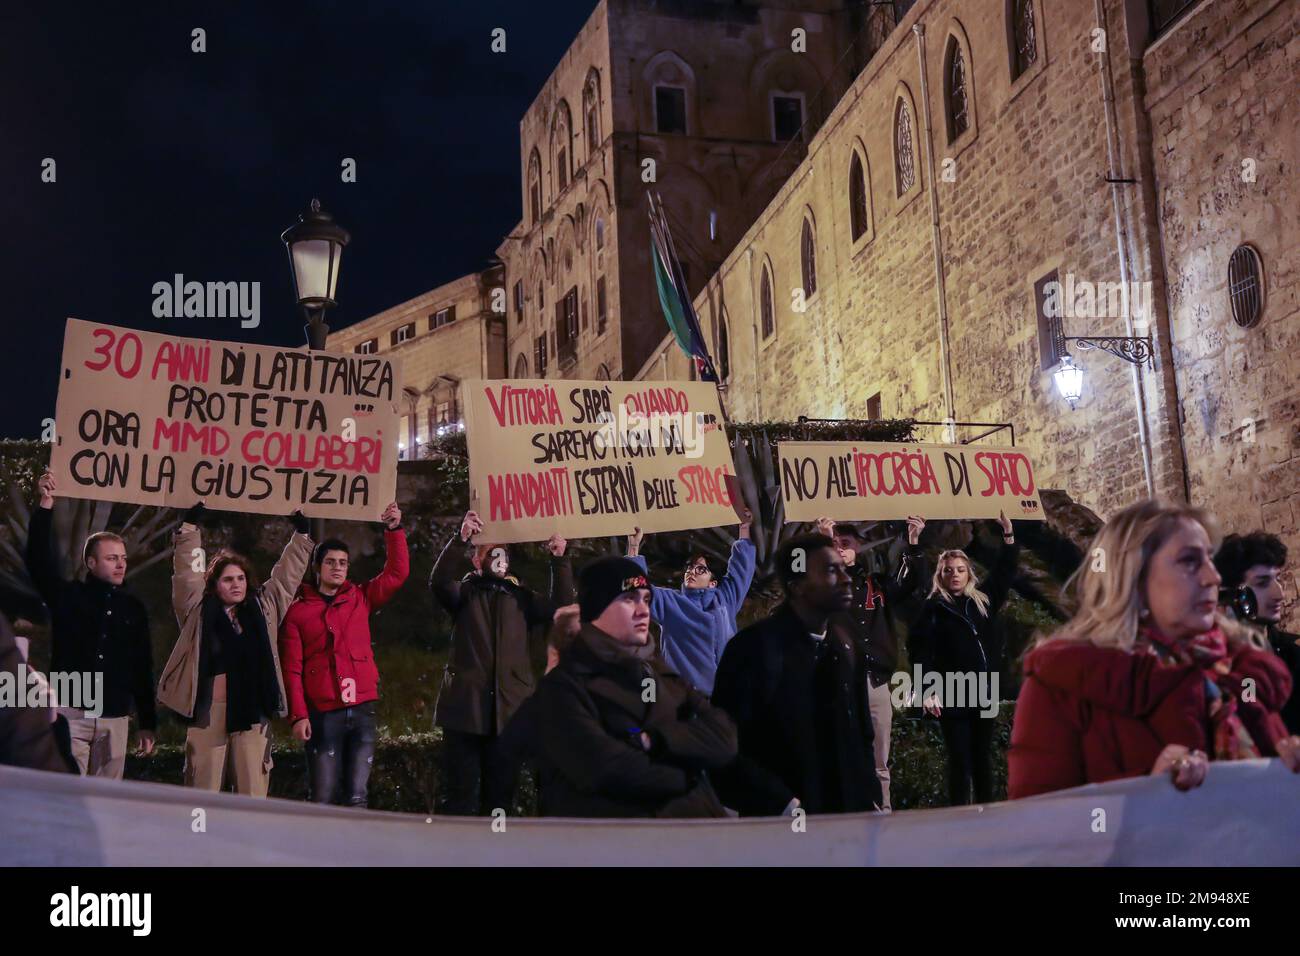 Palermo, Italy. 16th Jan, 2023. Demonstration in Palermo against the Mafia after the arrest of Matteo Messina Denaro. (Photo by Antonio Melita/Pacific Press) Credit: Pacific Press Media Production Corp./Alamy Live News Stock Photo